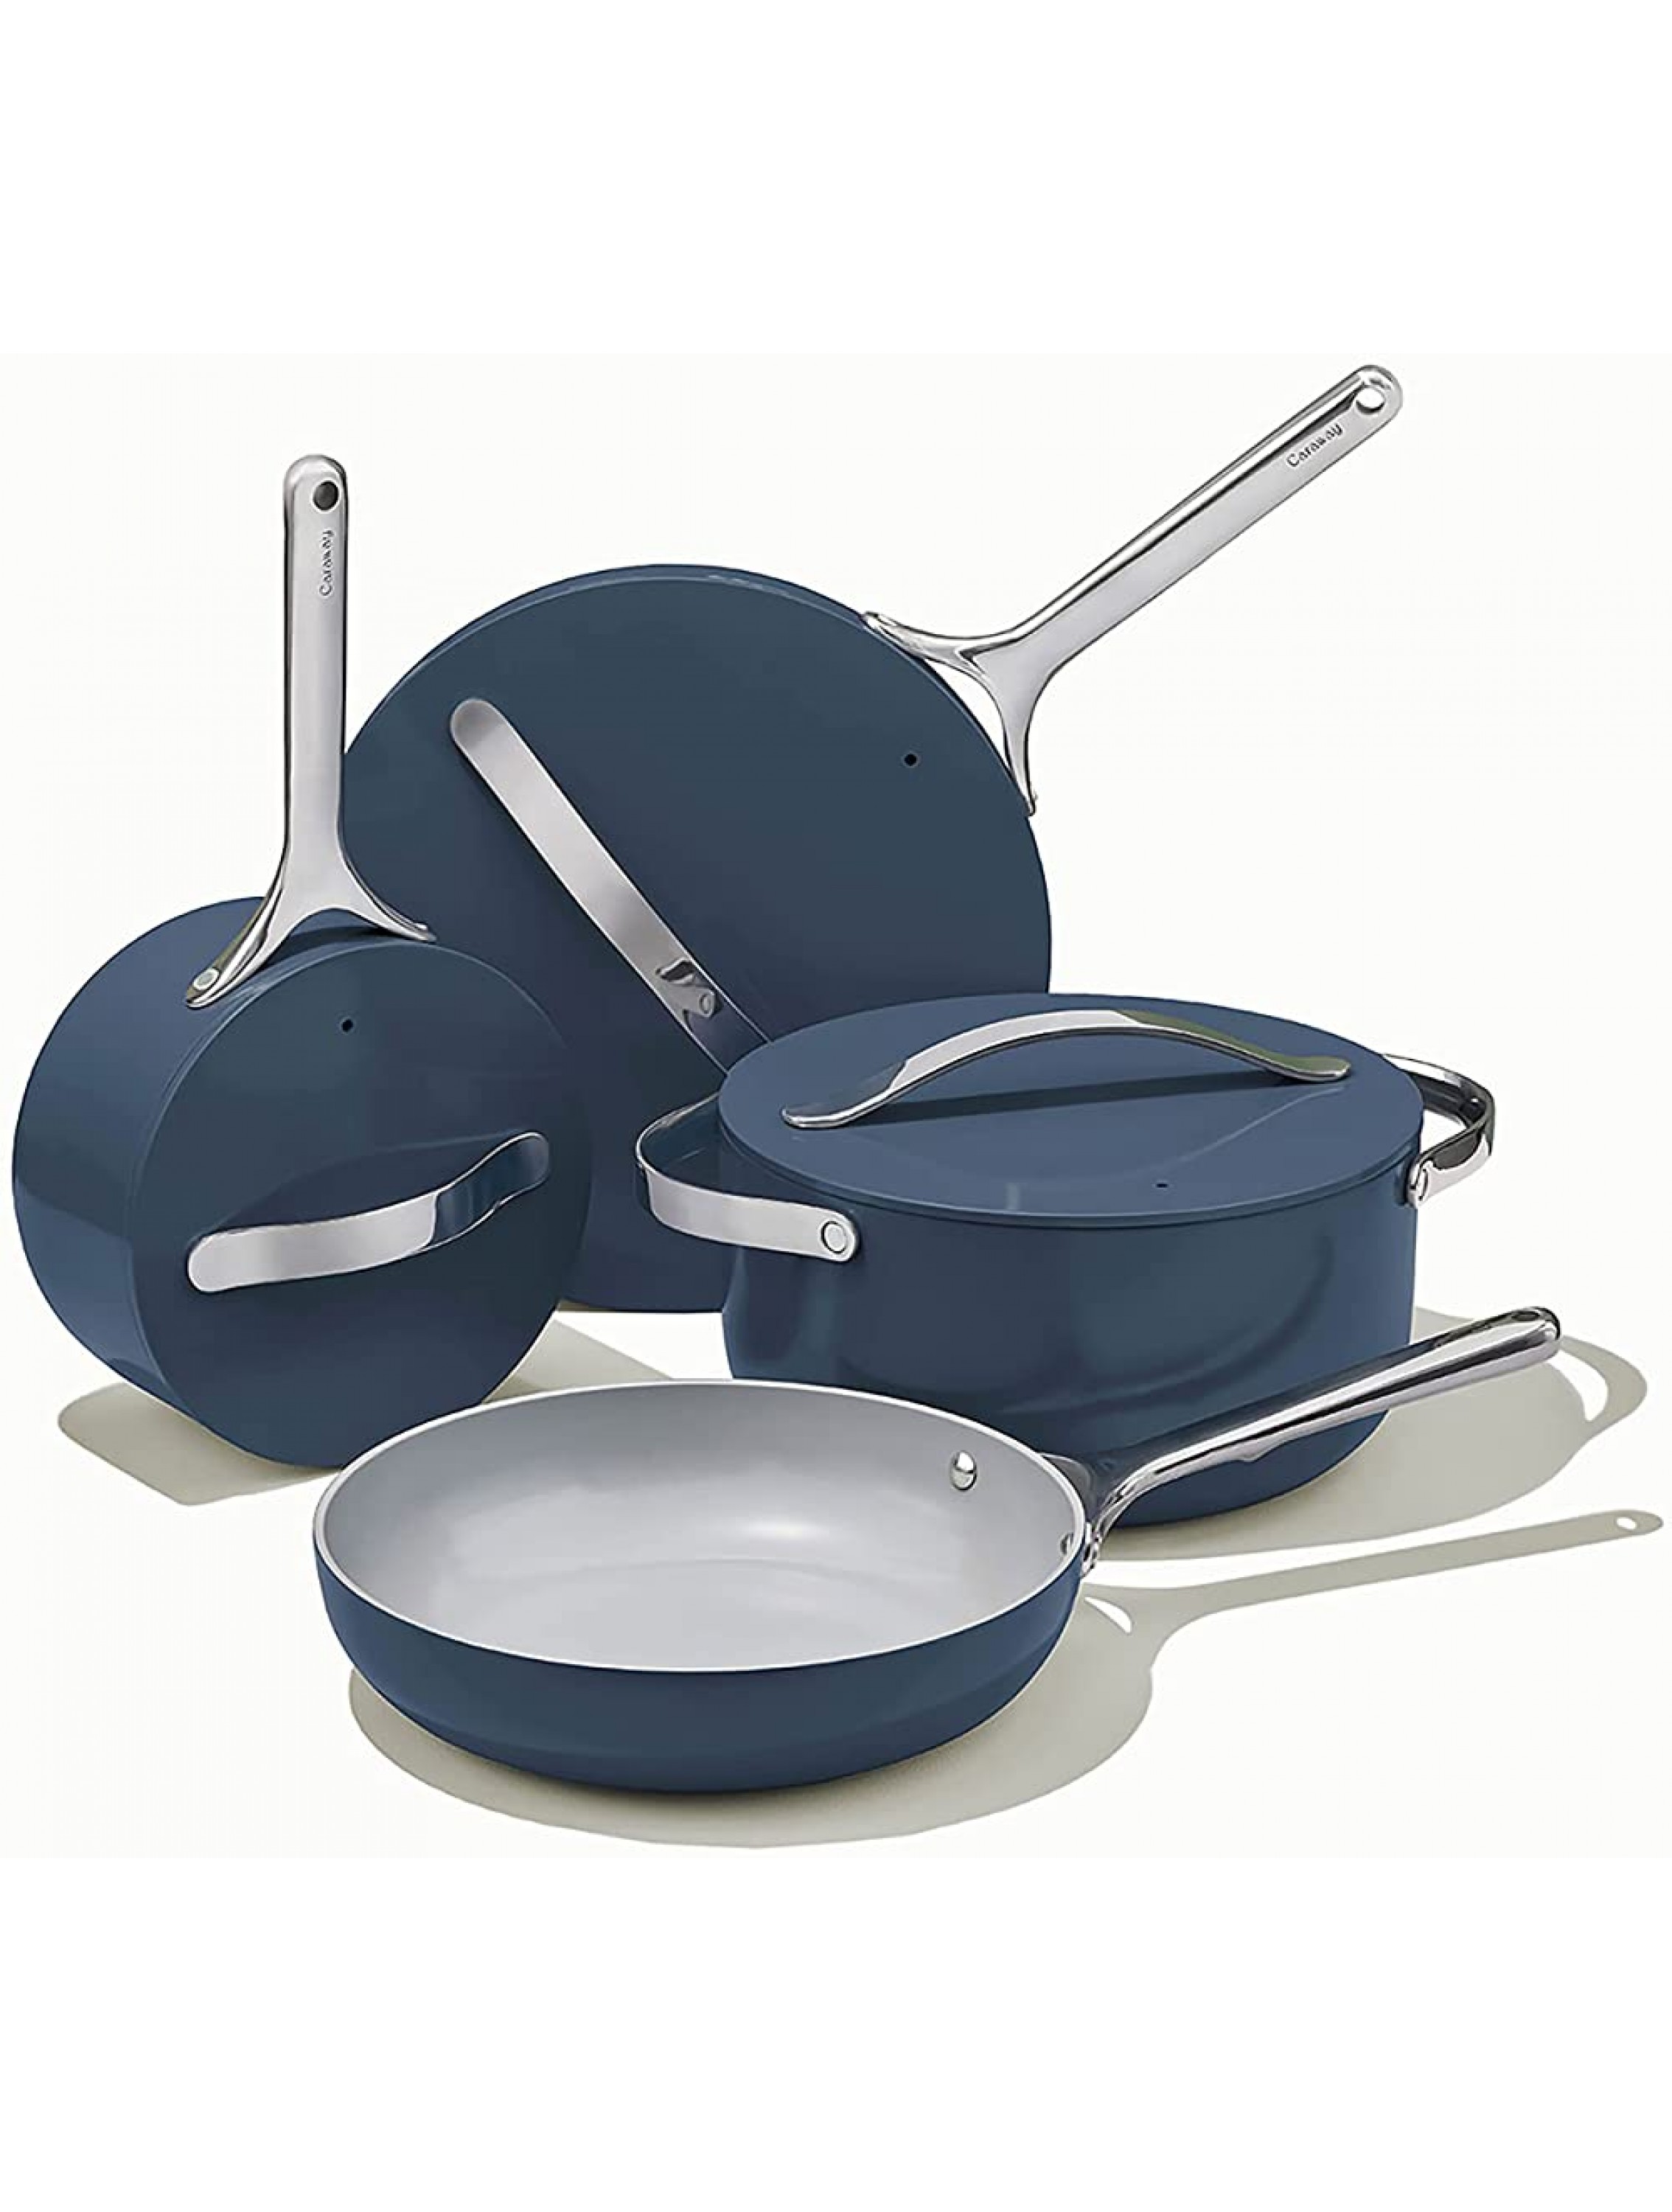 Caraway Nonstick Ceramic Cookware Set 12 Piece Pots Pans Lids and Kitchen Storage Non Toxic PTFE & PFOA Free Oven Safe & Compatible with All Stovetops Gas Electric & Induction Navy - BZ0TC60WE